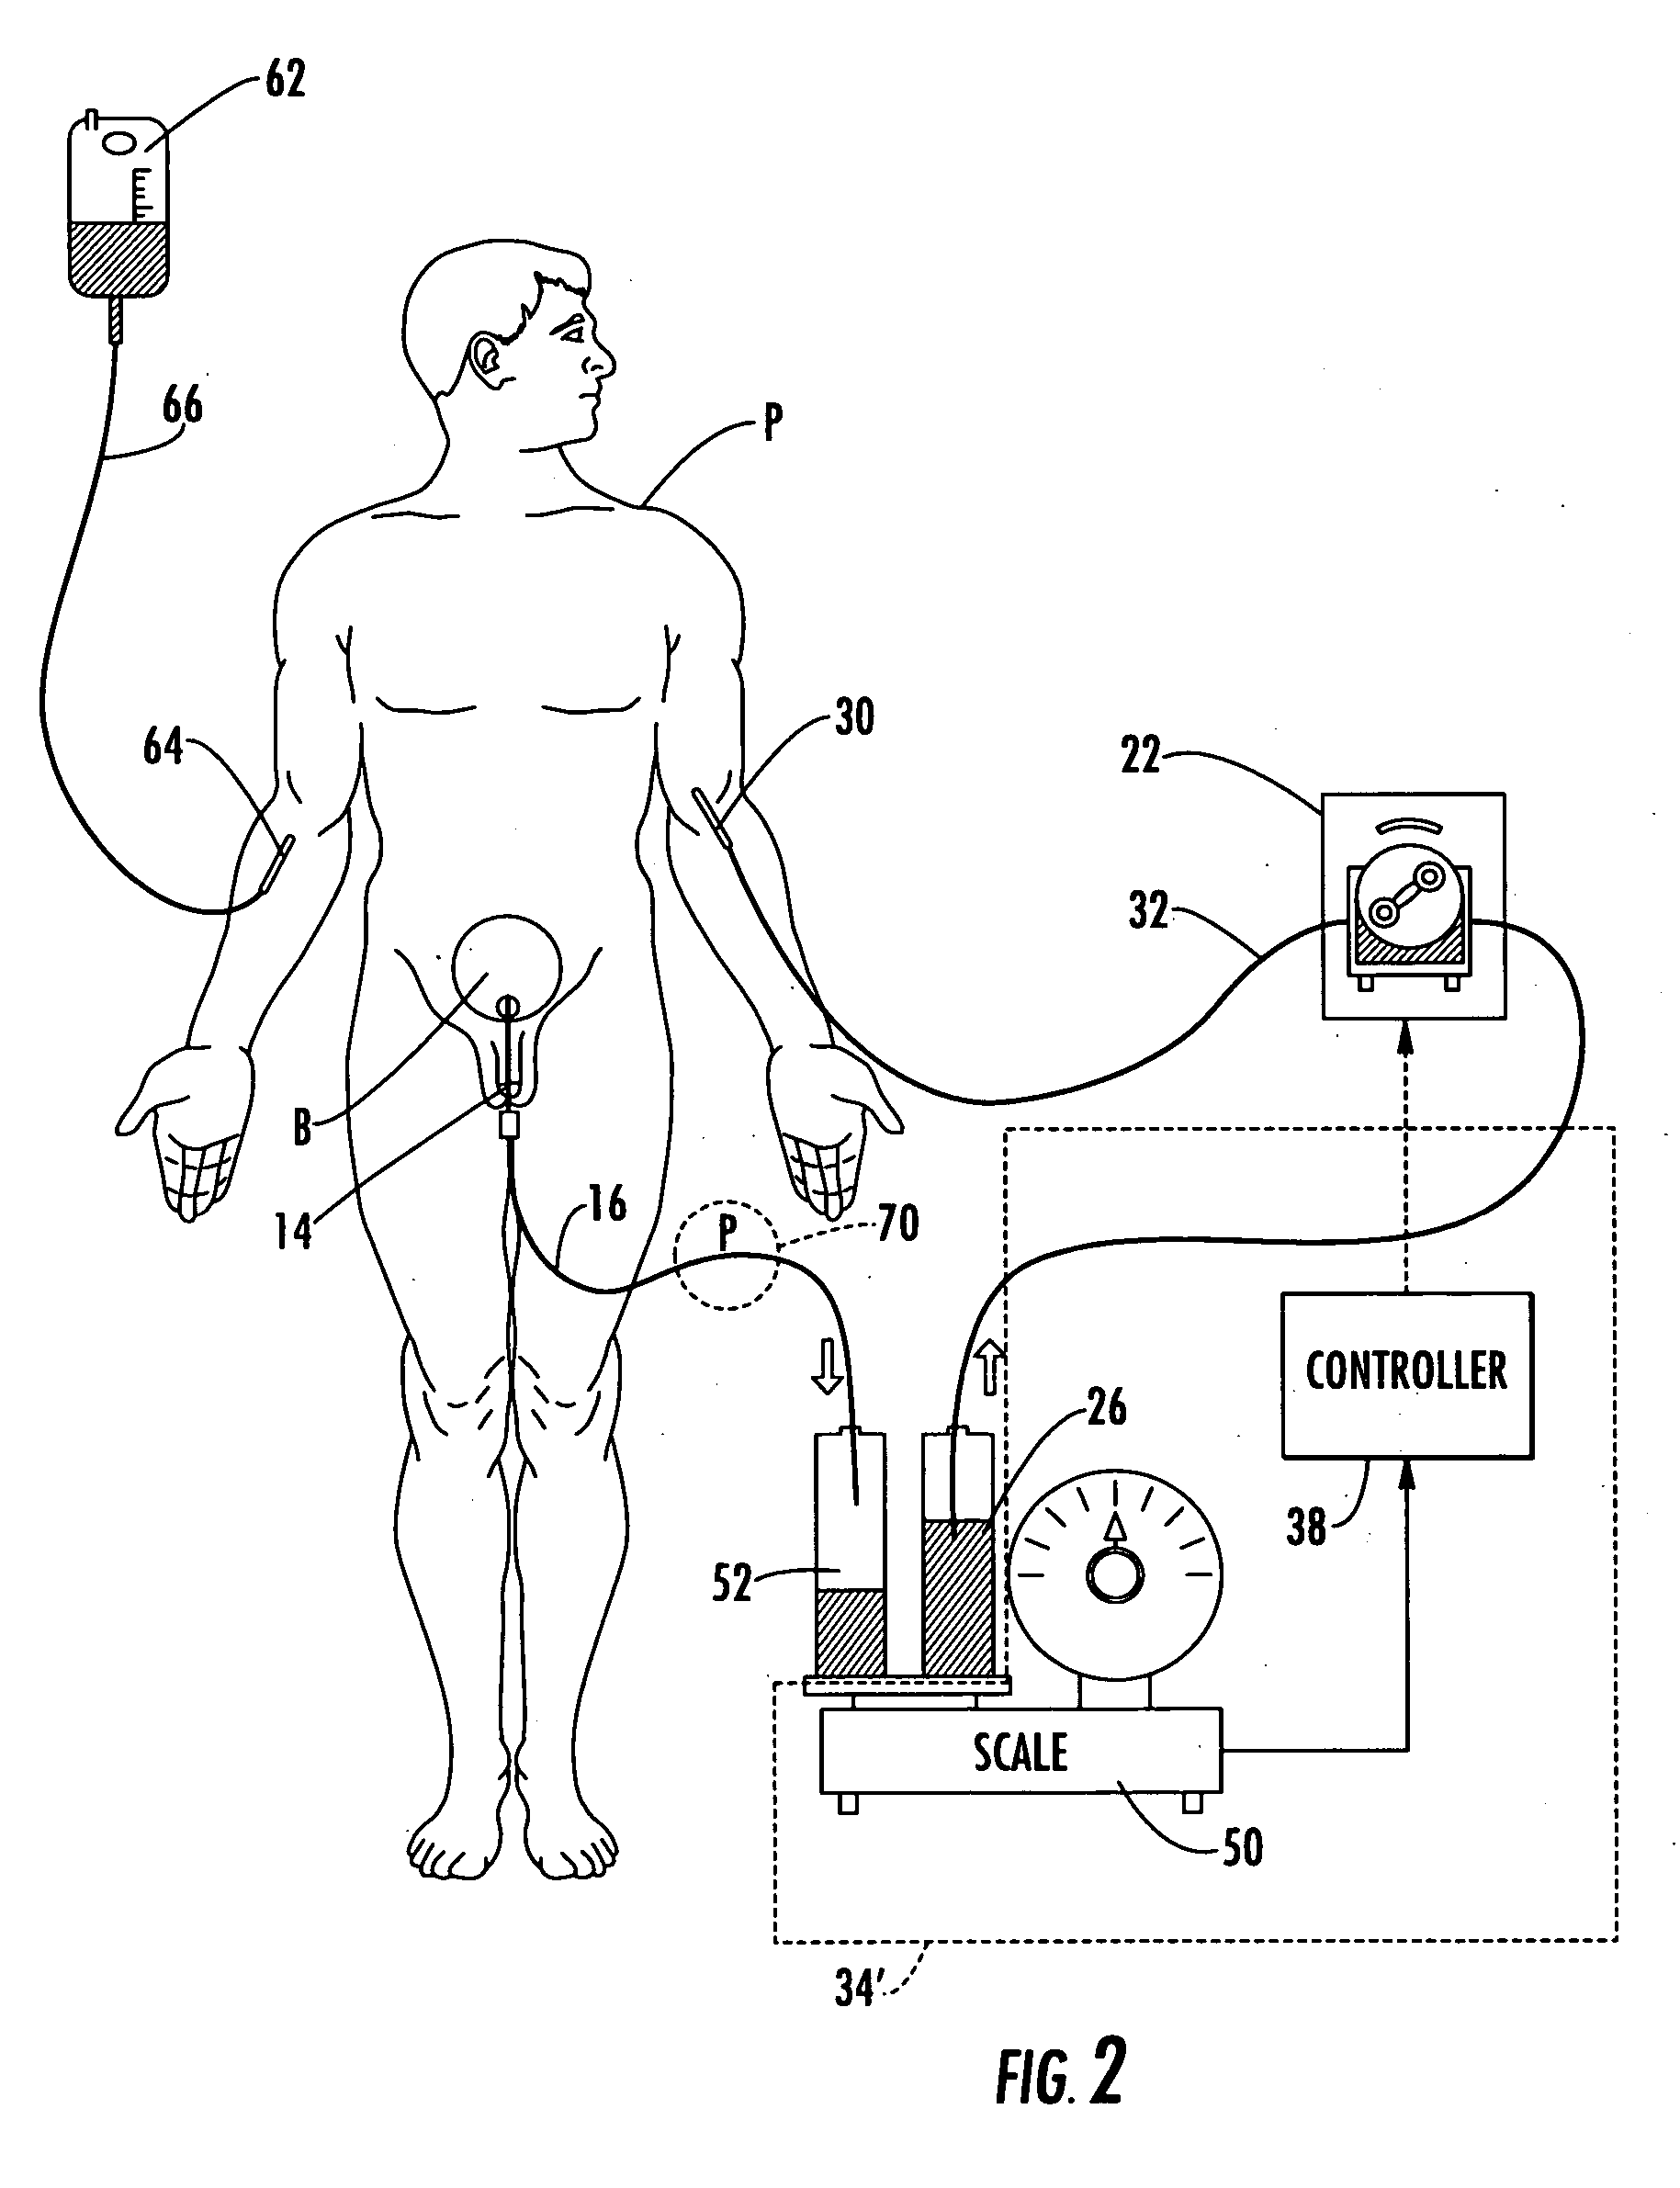 Patient hydration system with a redundant monitoring of hydration fluid infusion